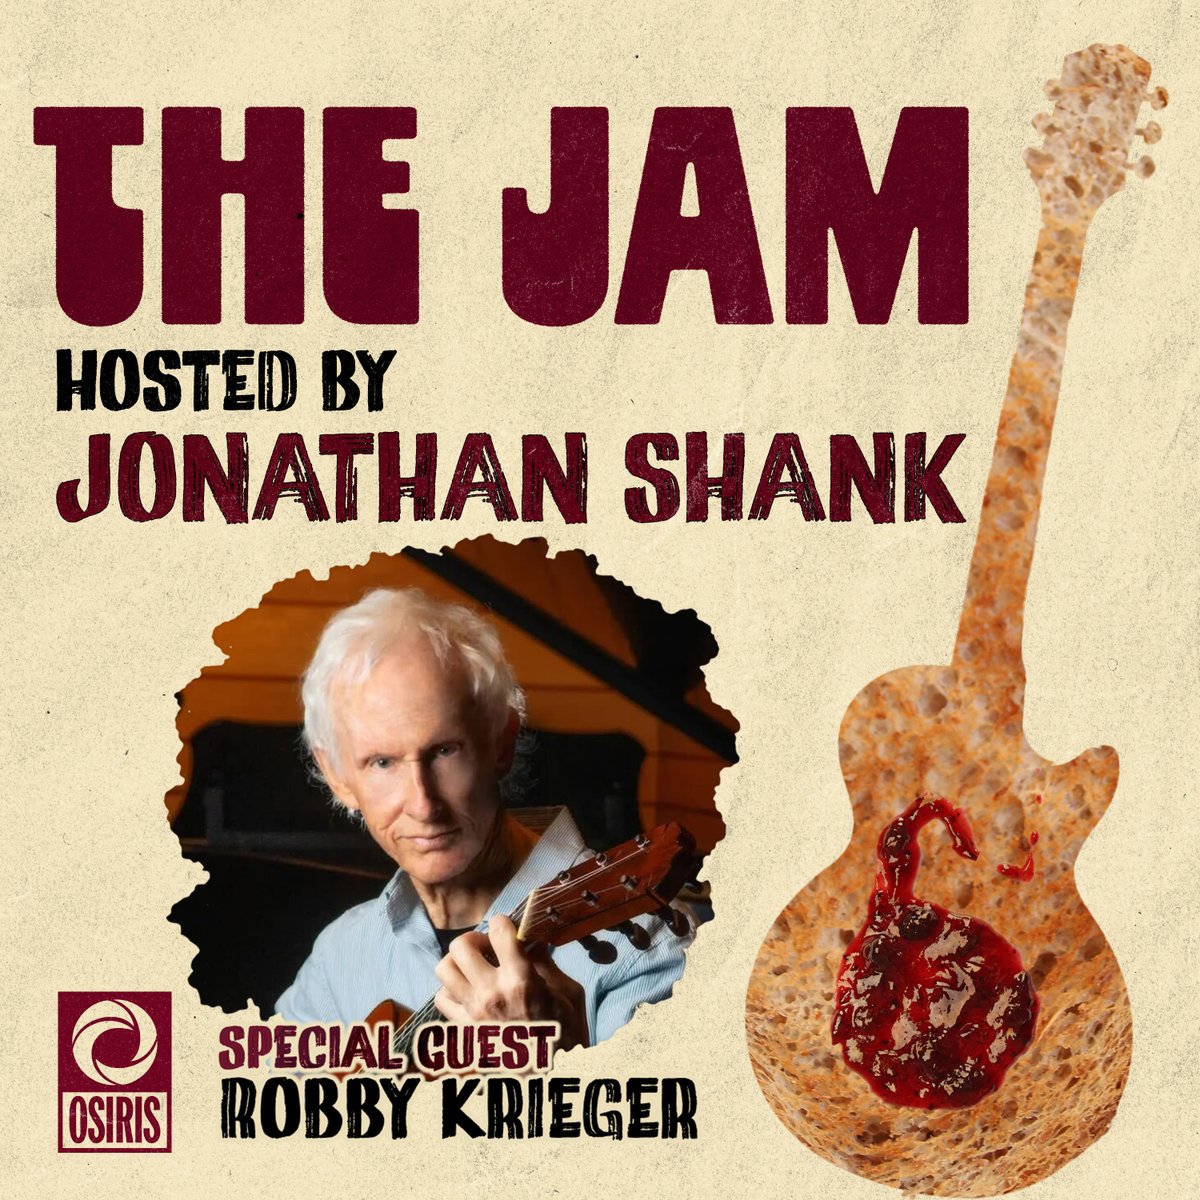 Check out Robby on this week’s episode of The Jam chatting about the origins of The Doors, legendary collaborations, and everything from the Psychedelic Rangers to The Soul Savages! Listen here: found.ee/DoorsJamRobby